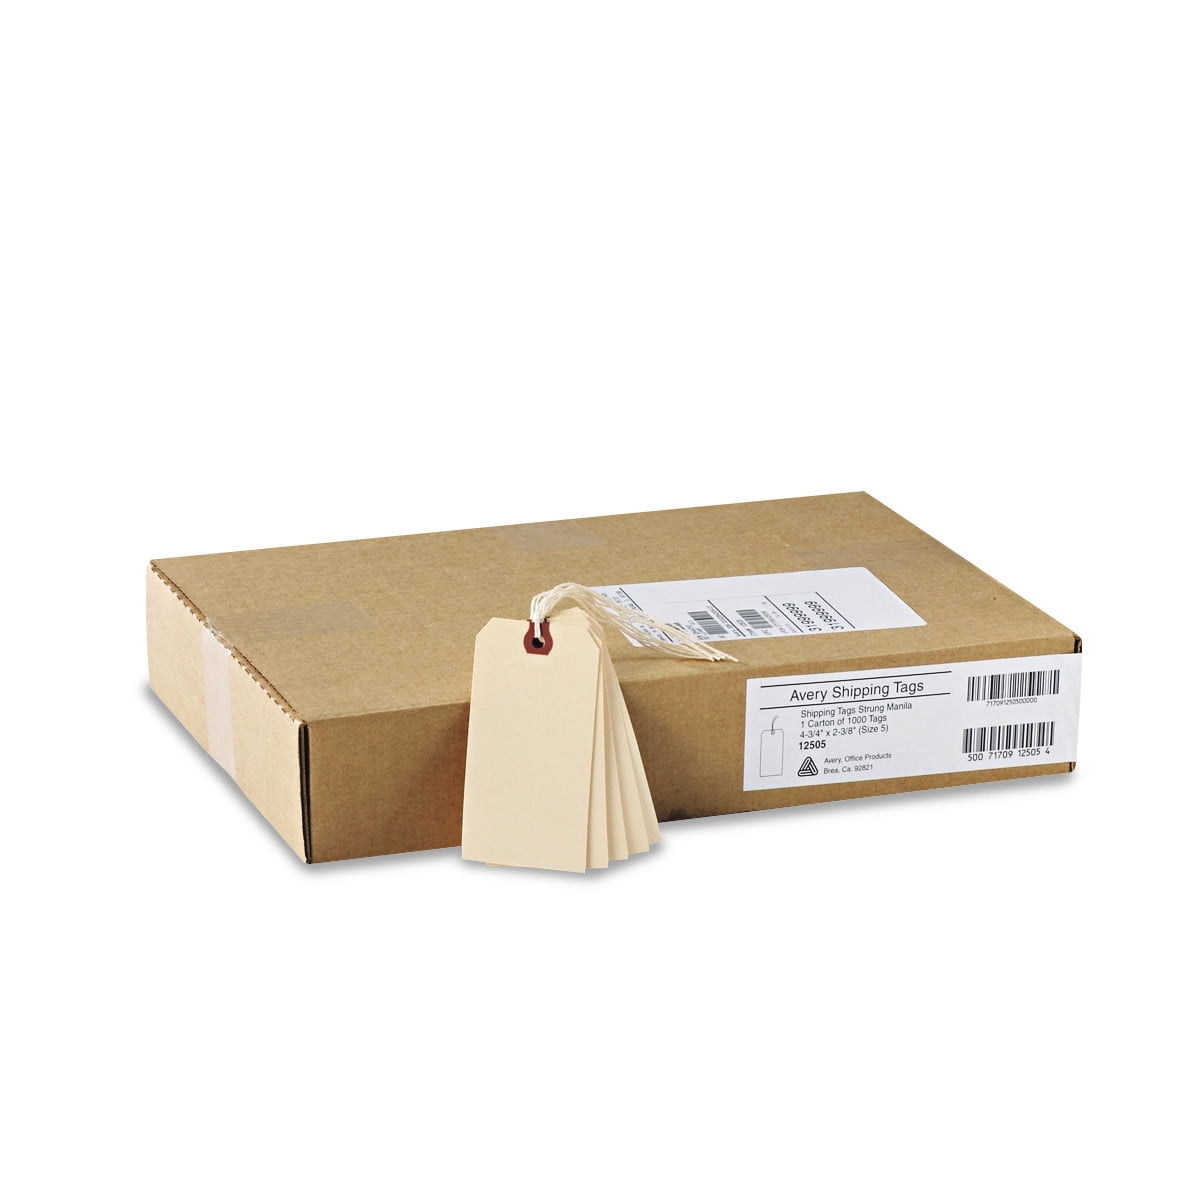 Shipping Tags with String Attached 4 3/4 x 2 3/8 Box of 200 Large Manila Paper Tags with Strings and Reinforced Hole 12 x 6 cm 